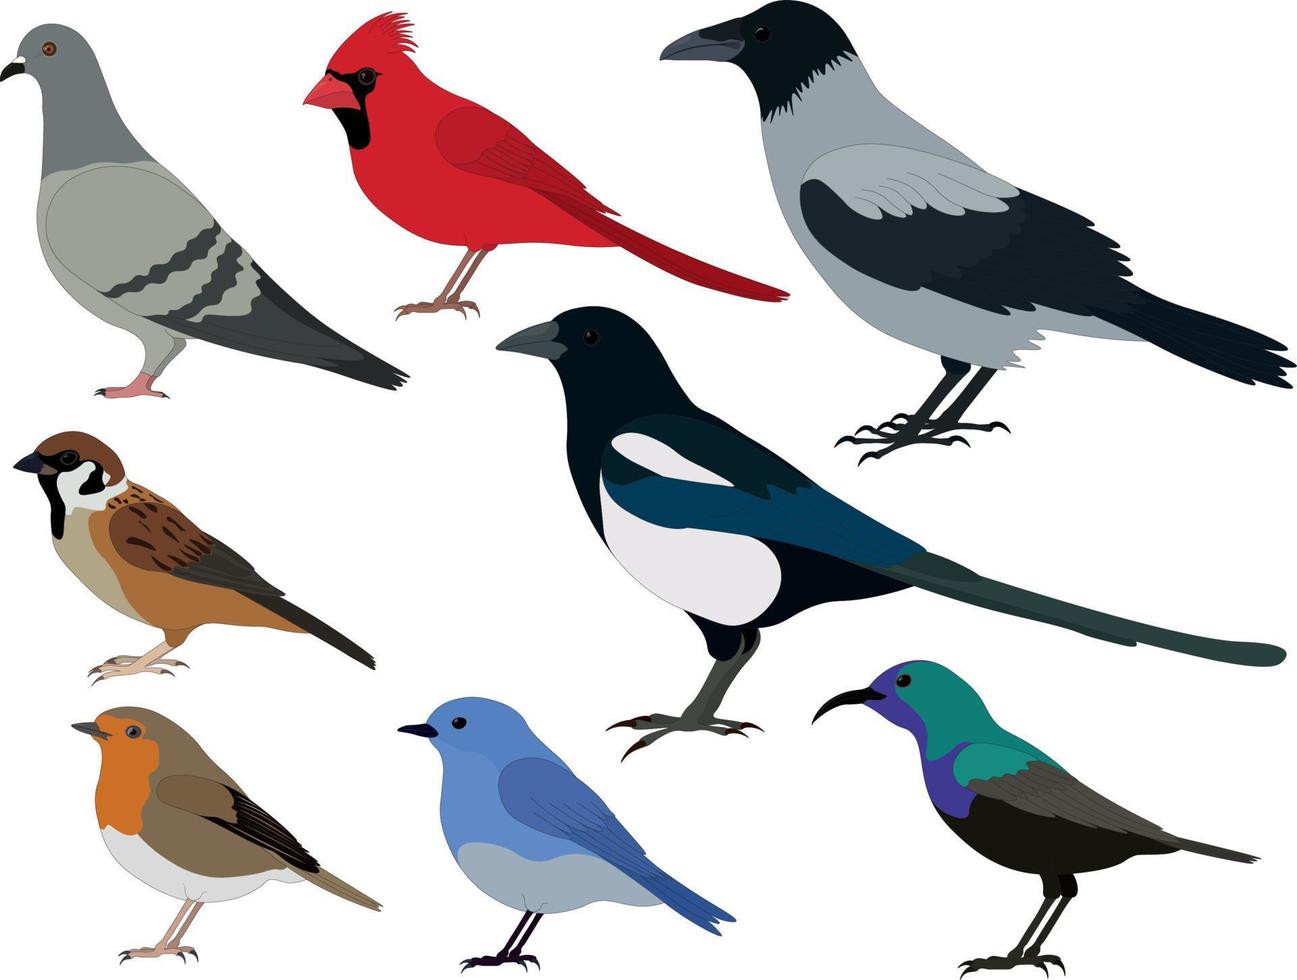 Common birds types collection vector illustration